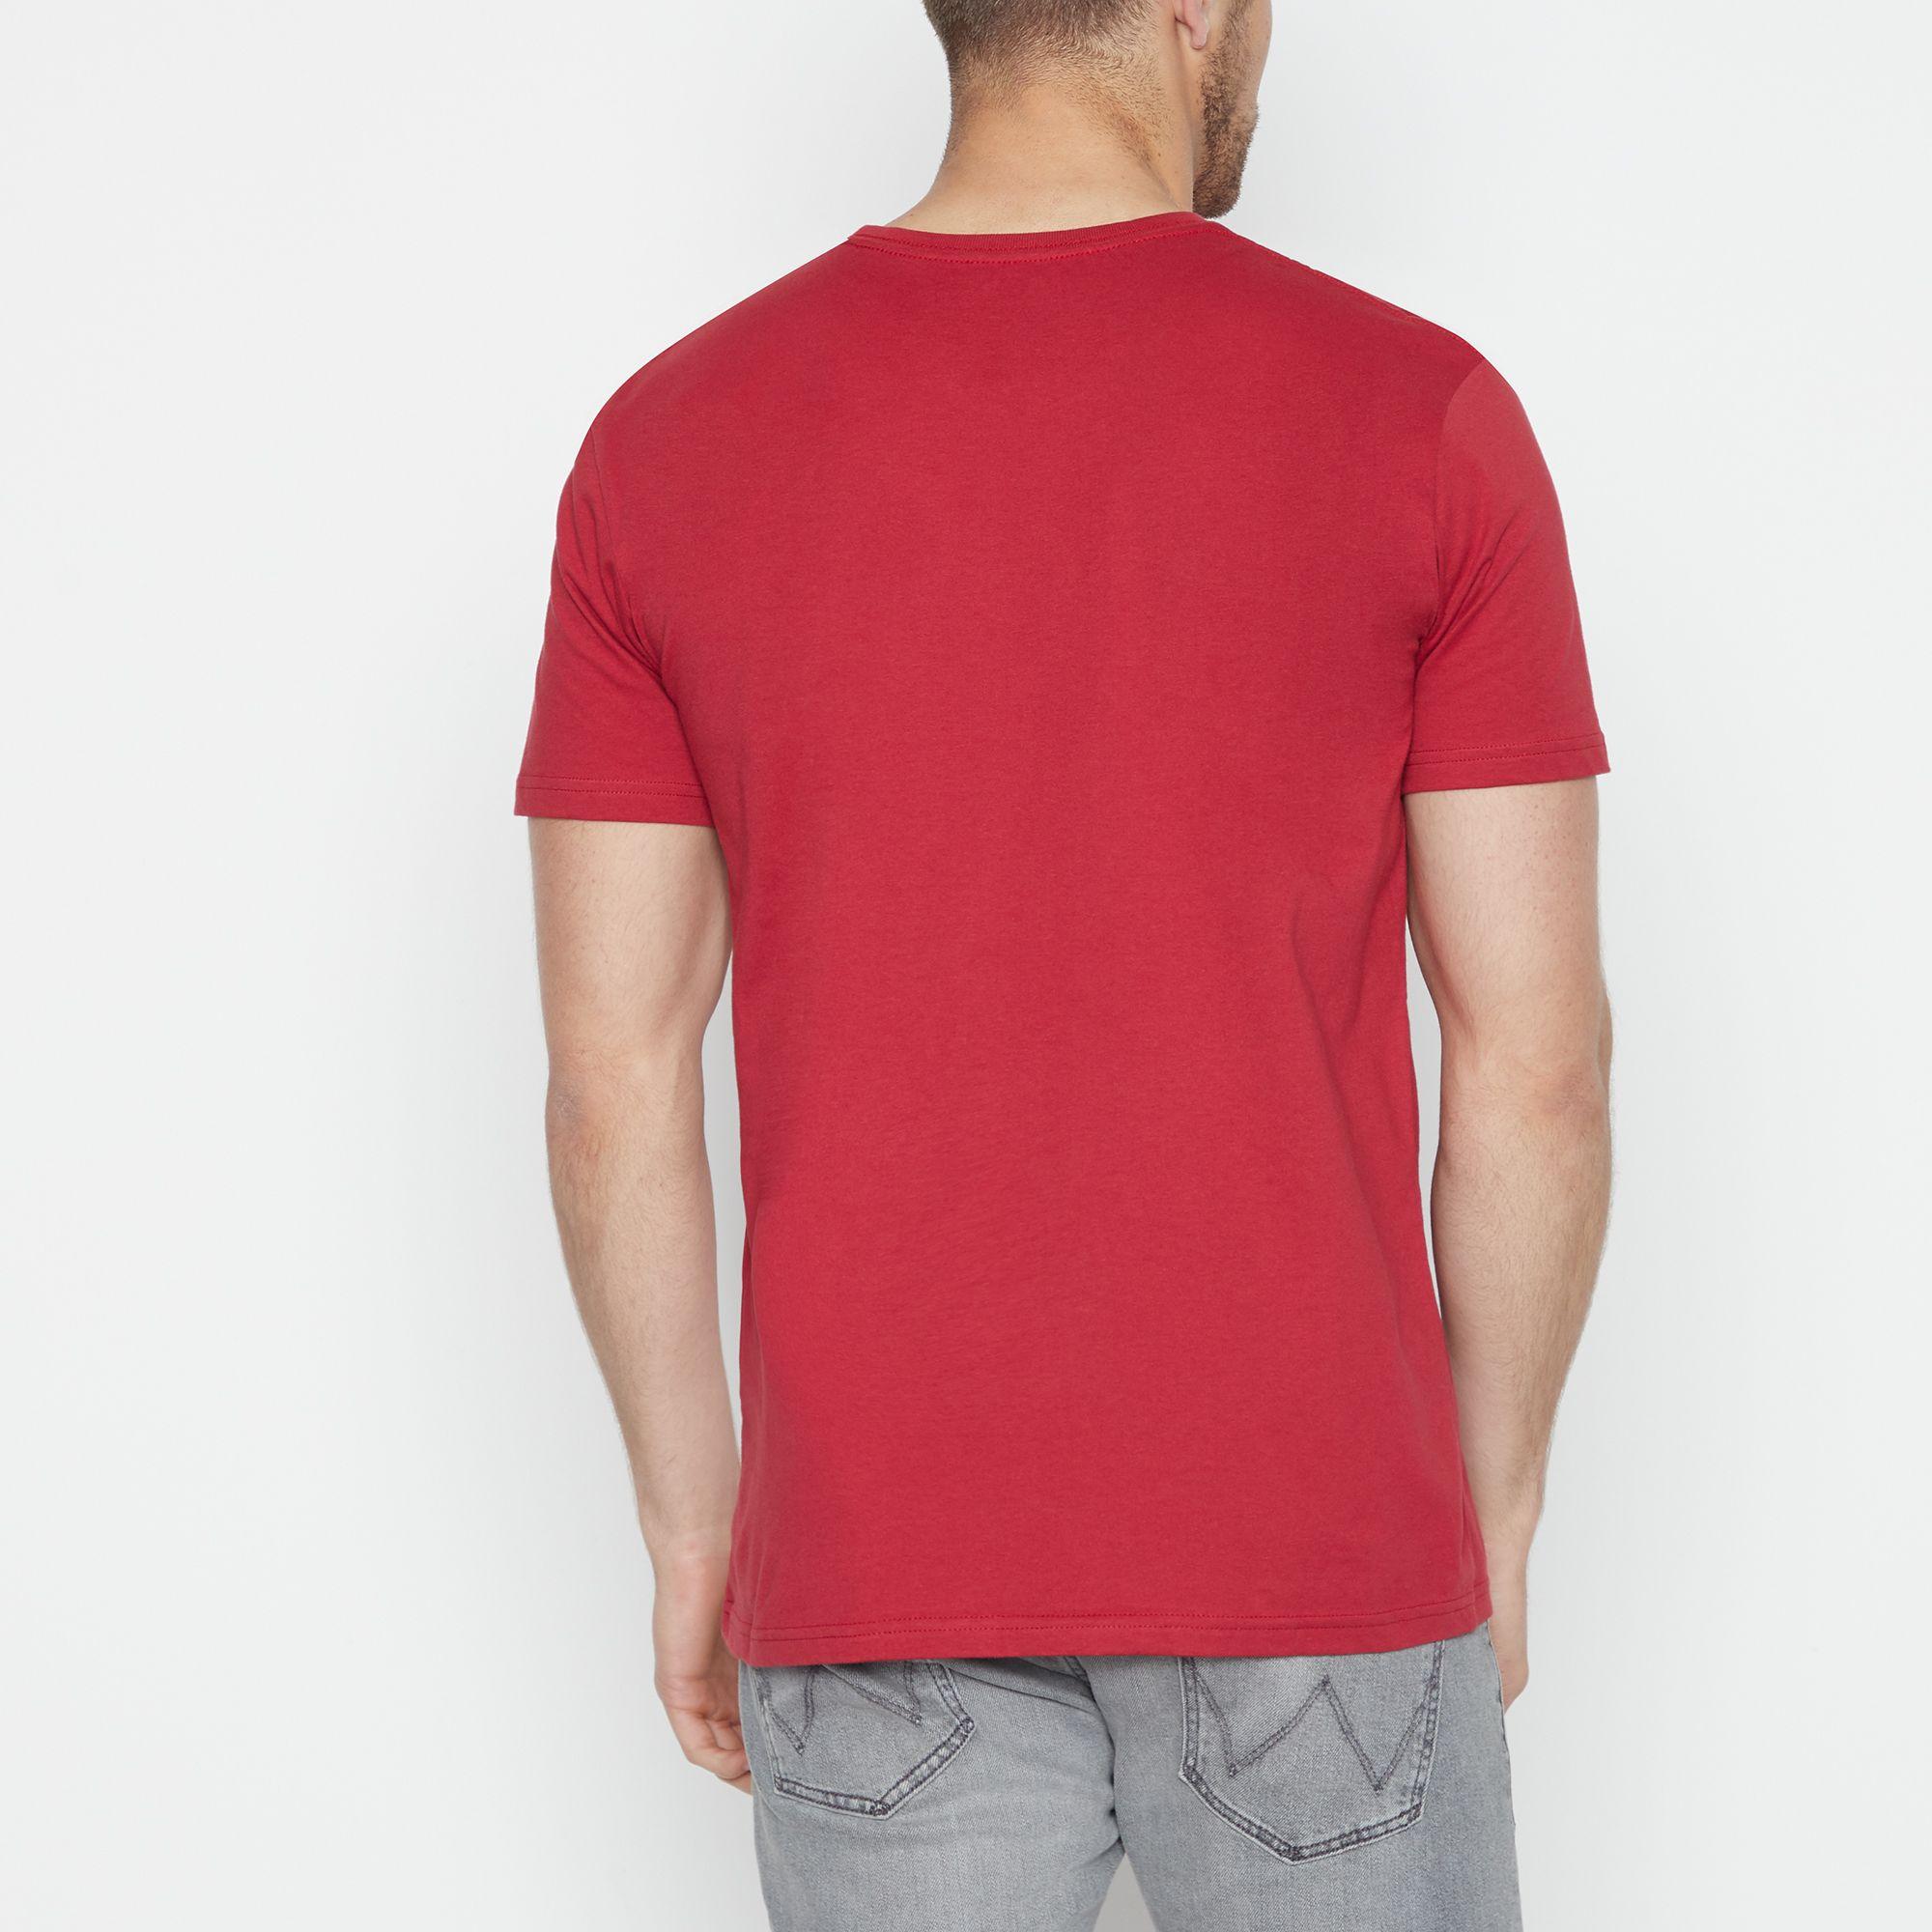 Quiksilver 'diversion' Cotton T-shirt in Red for Men - Lyst